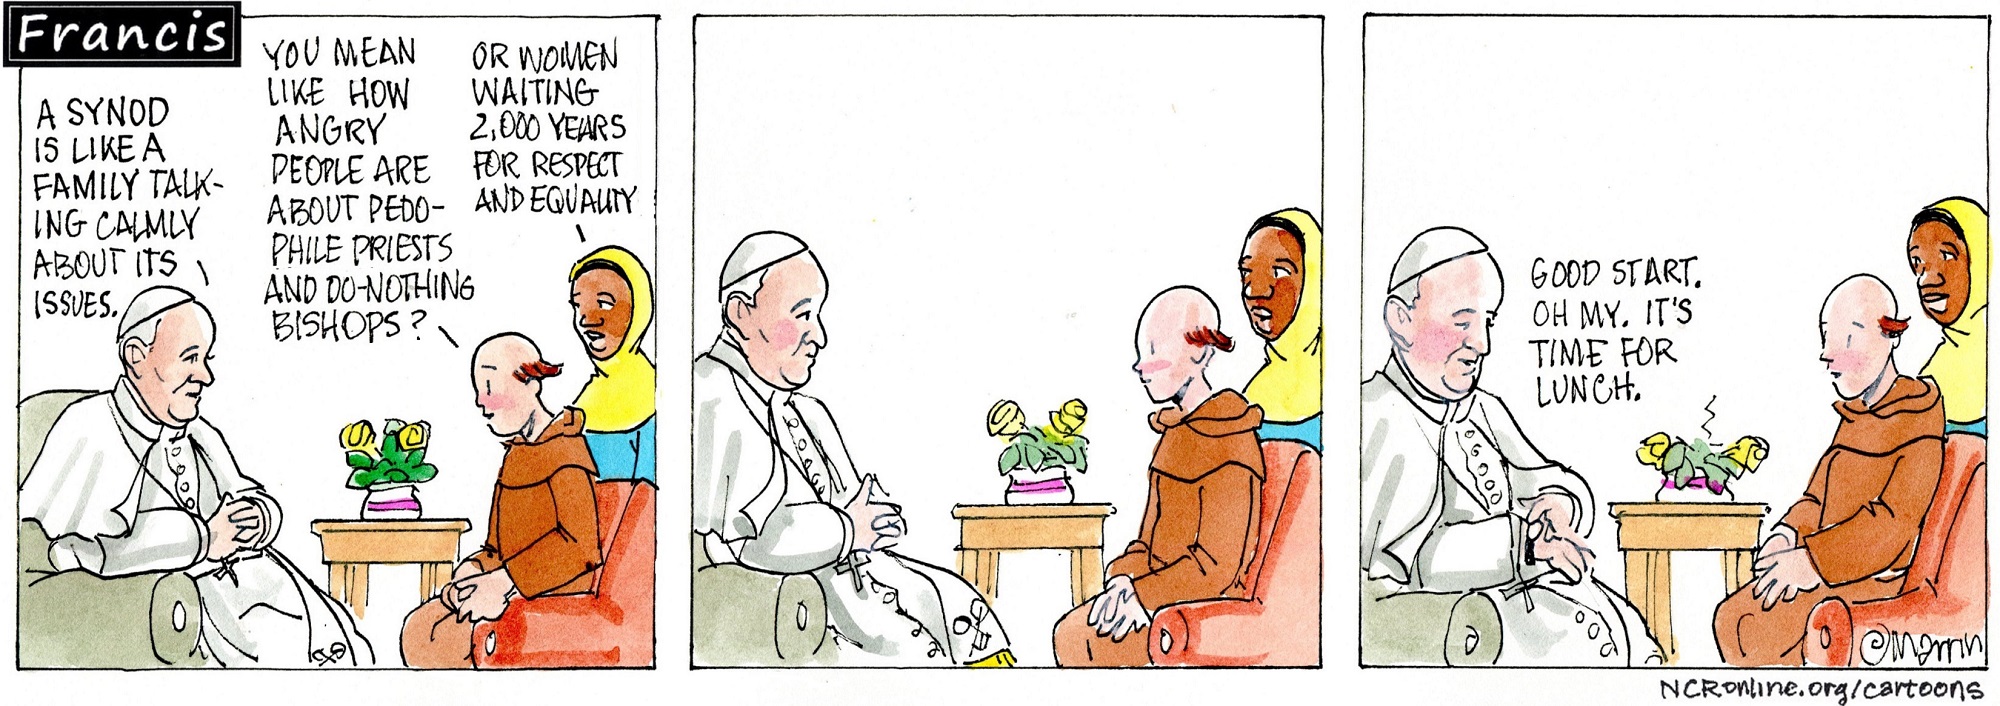 Francis, the comic strip: Francis, Gabby and Brother Leo discuss what a synod means for the church.